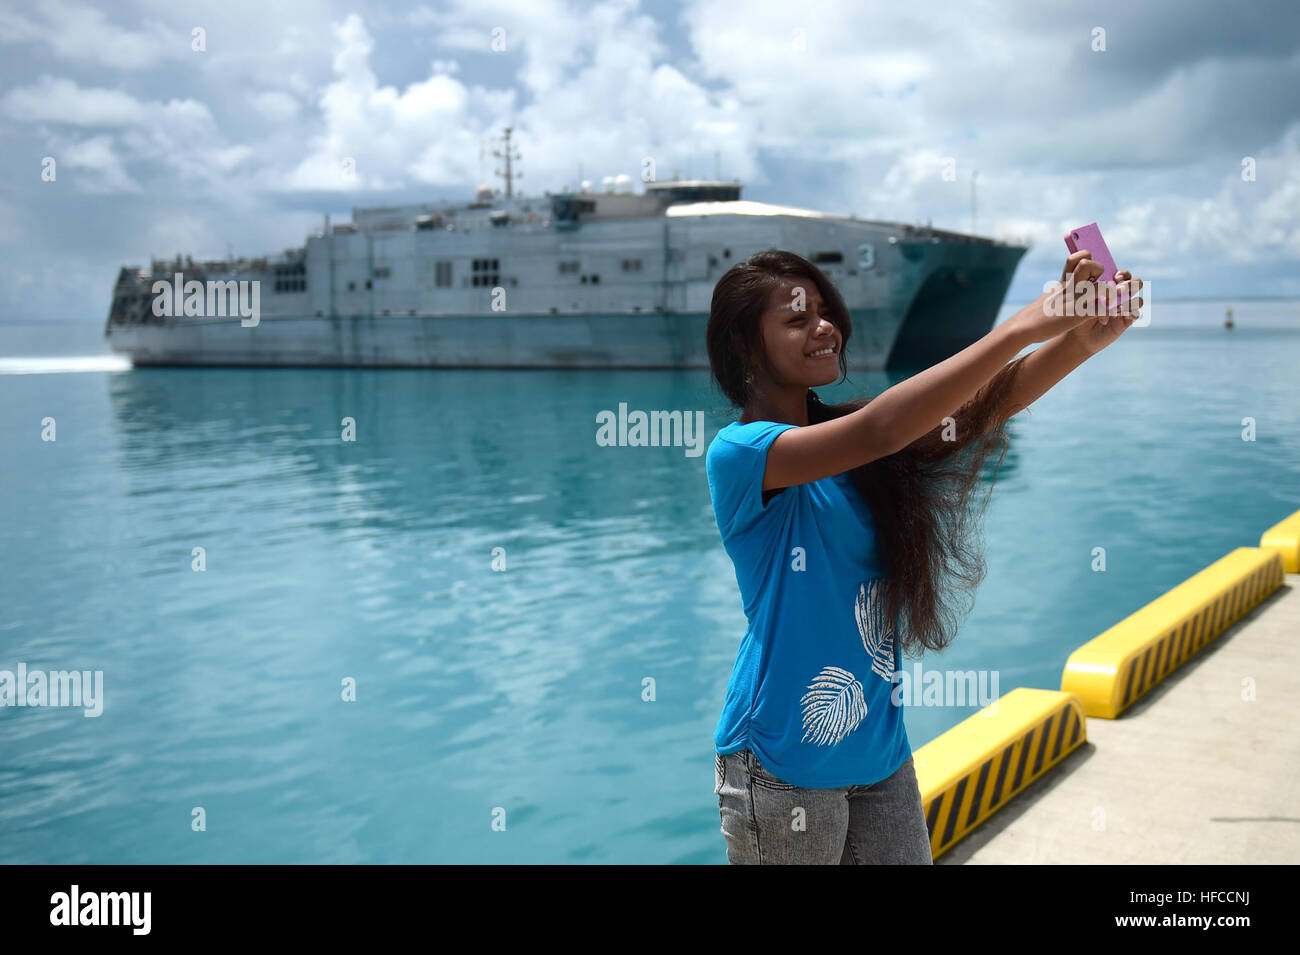 150602-N-HY254-027 TARAWA, Kiribati (June 2, 2015) An I-Kiribati girl pose for a “selfie” as the Military Sealift Command joint high-speed vessel USNS Millinocket (JHSV 3) arrives in Tarawa, Republic of Kiribati in support of Pacific Partnership 2015.  Tarawa is an atoll and the capital of the Republic of Kiribati, in the central Pacific Ocean and is the first country Millinocket will visit during PP15.  Now in its tenth iteration, Pacific Partnership is the largest annual multilateral humanitarian assistance and disaster relief preparedness mission conducted in the Indio-Asia-Pacific region.  Stock Photo